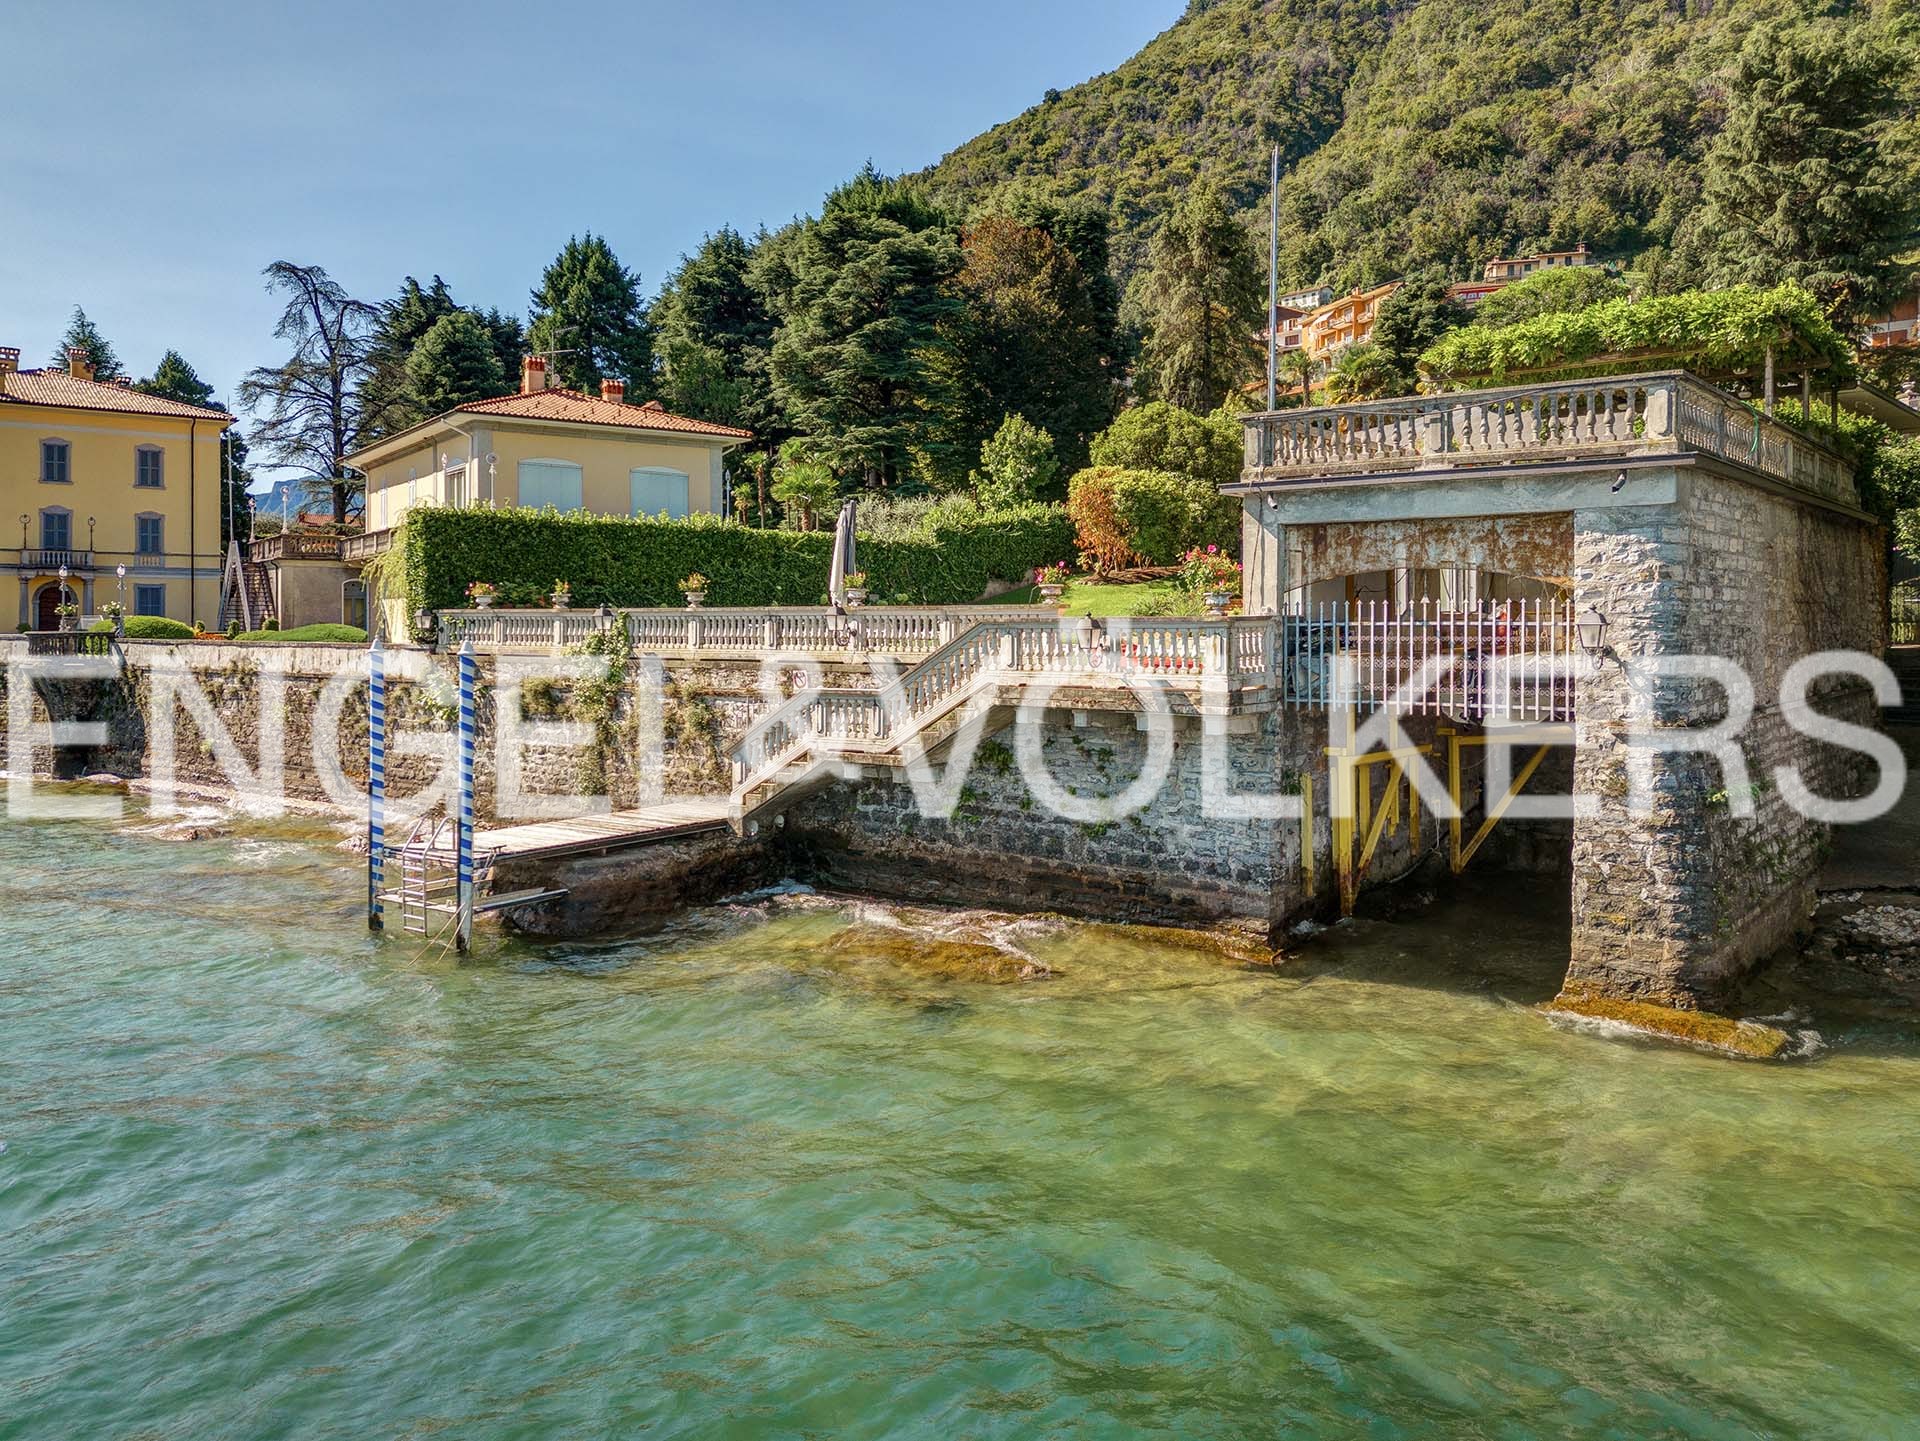 Holiday house Onno for 1 - 20 persons with 8 bedrooms - Row house - Oliveto  Lario